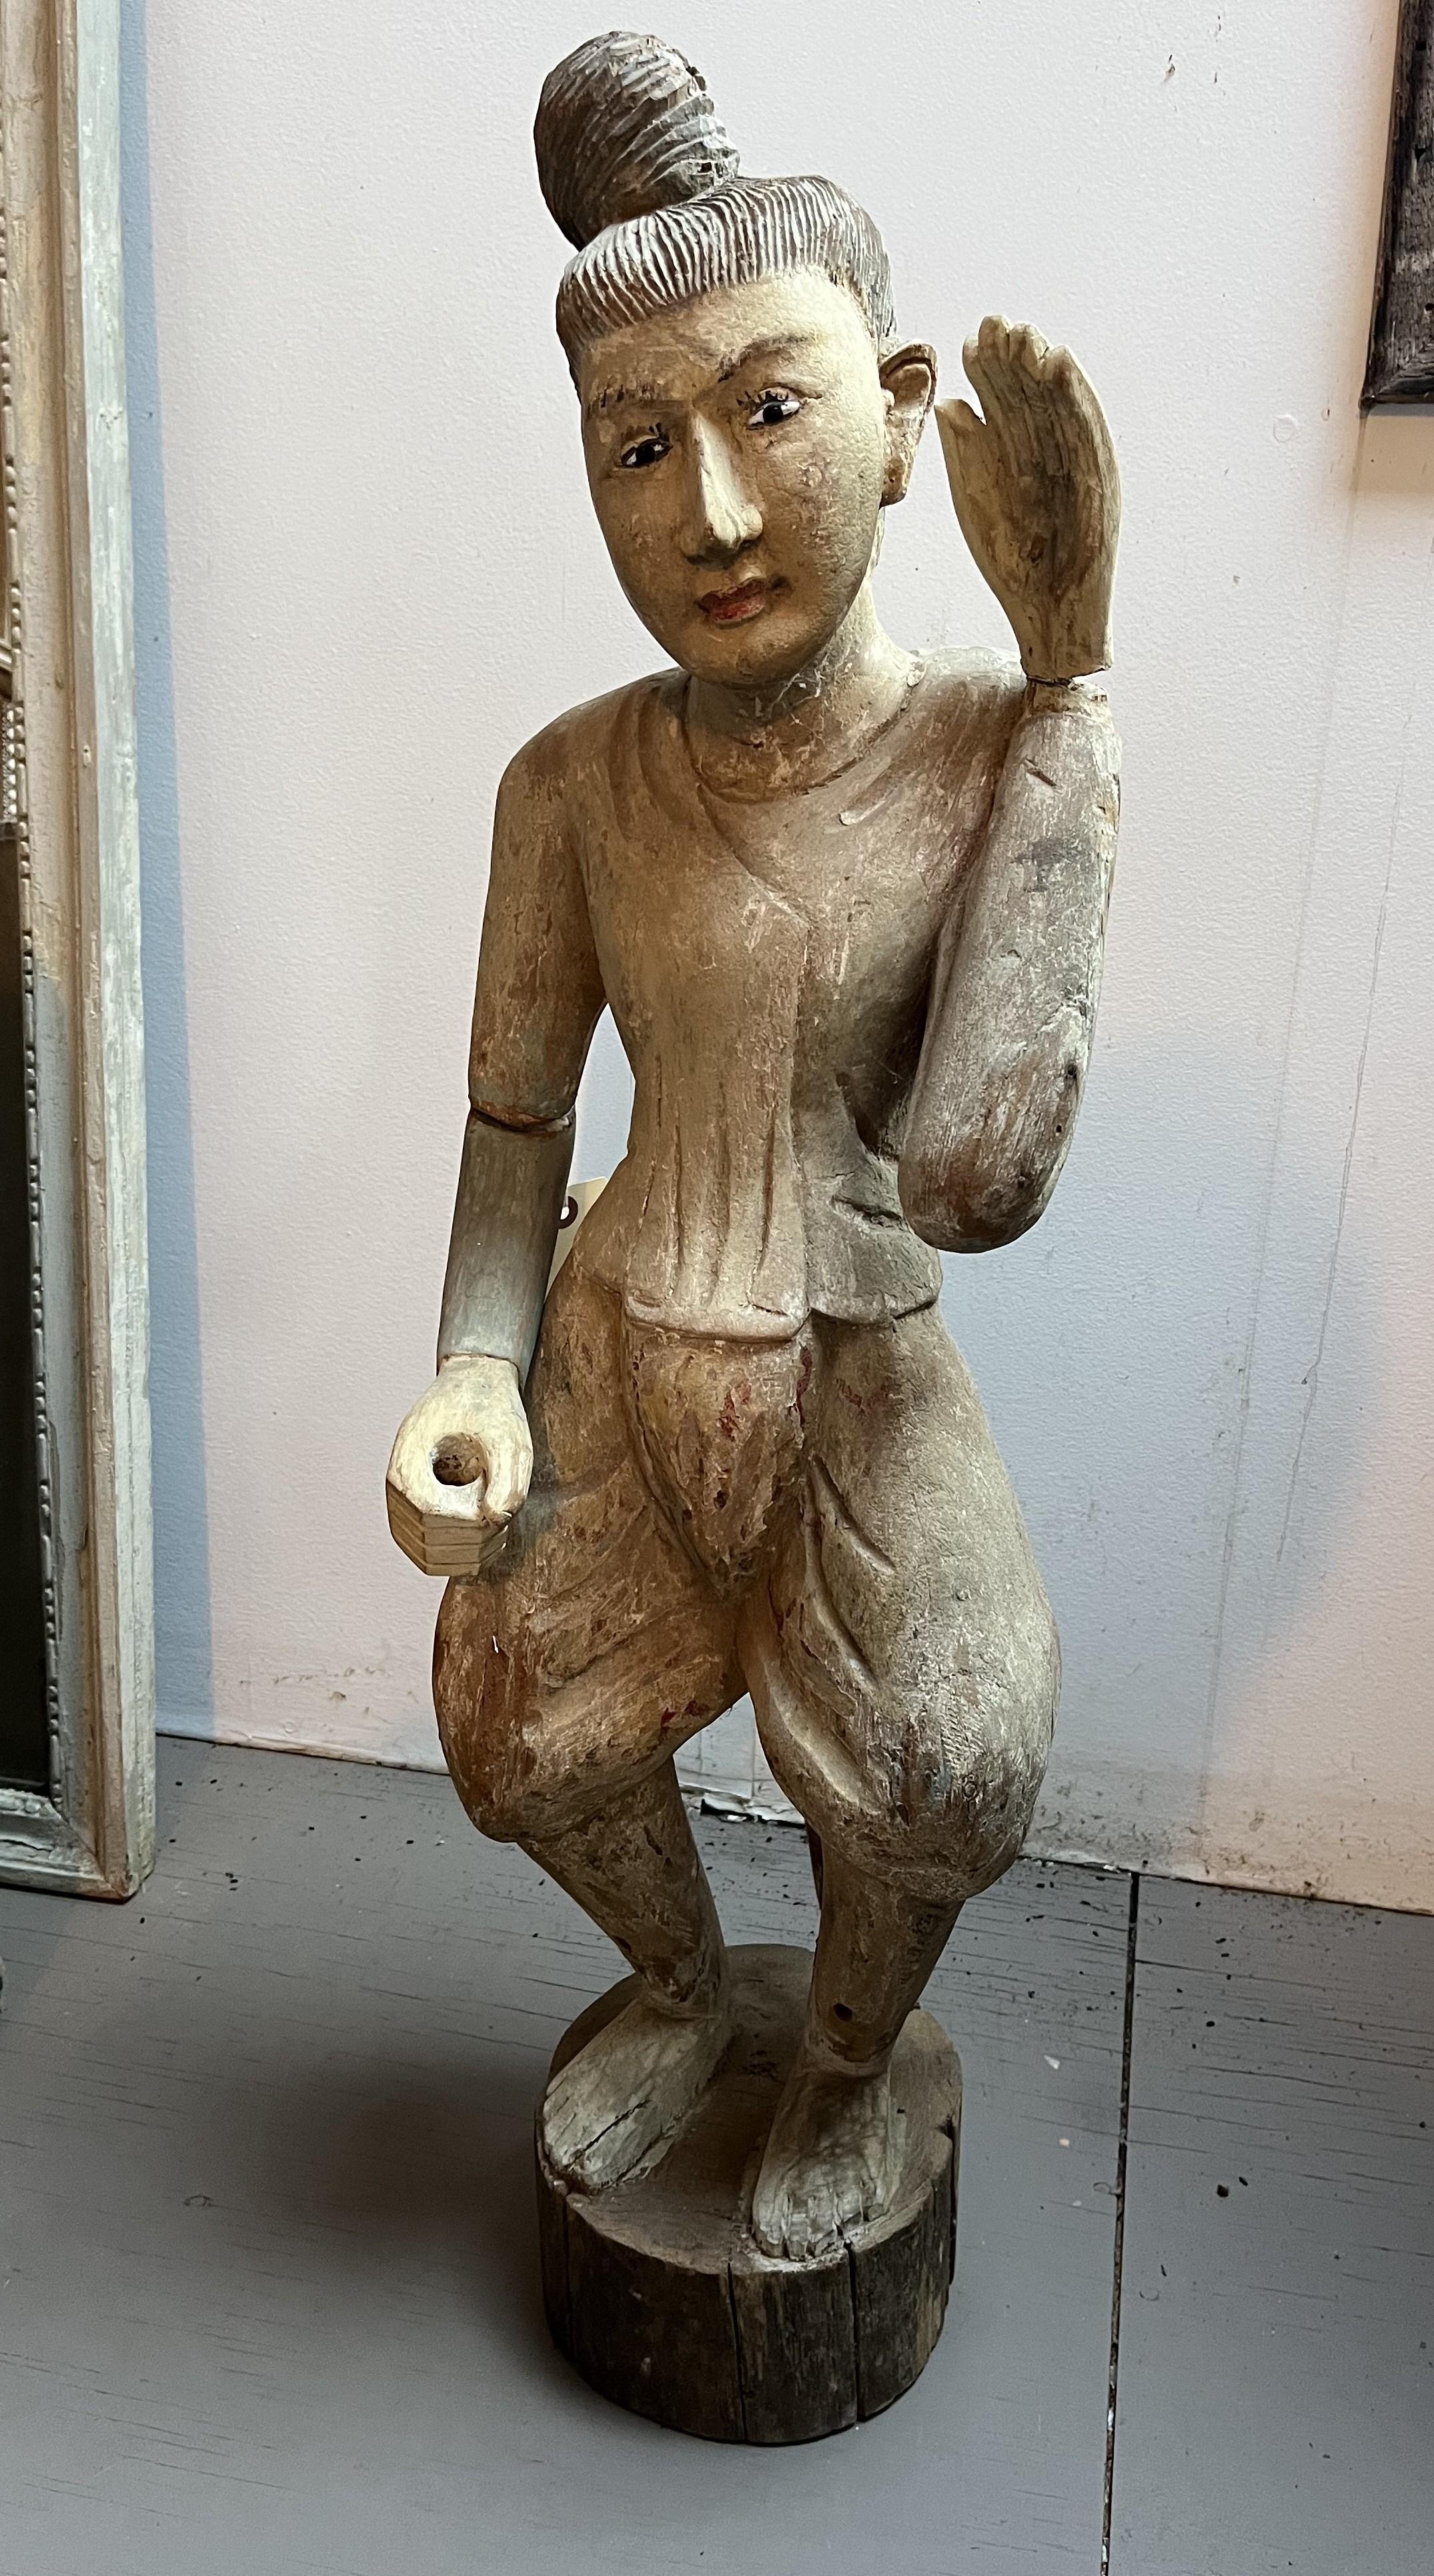 A carved wood statue of a male Balinese dancer in traditional clothing, late 19th century-early 20th century. Retains much of its original painted finish.